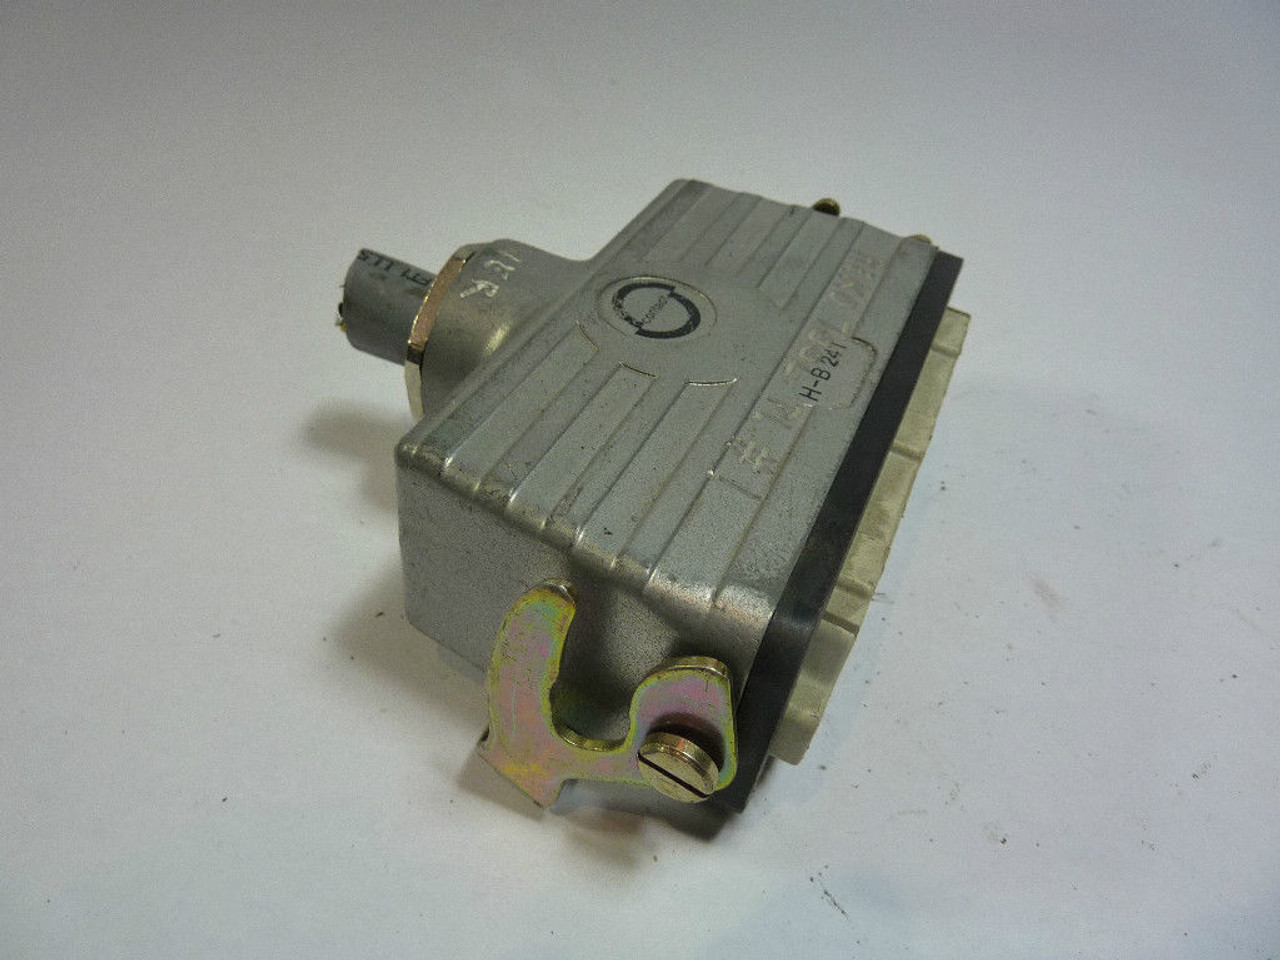 Contact H-B24T Plug Connector 600V USED